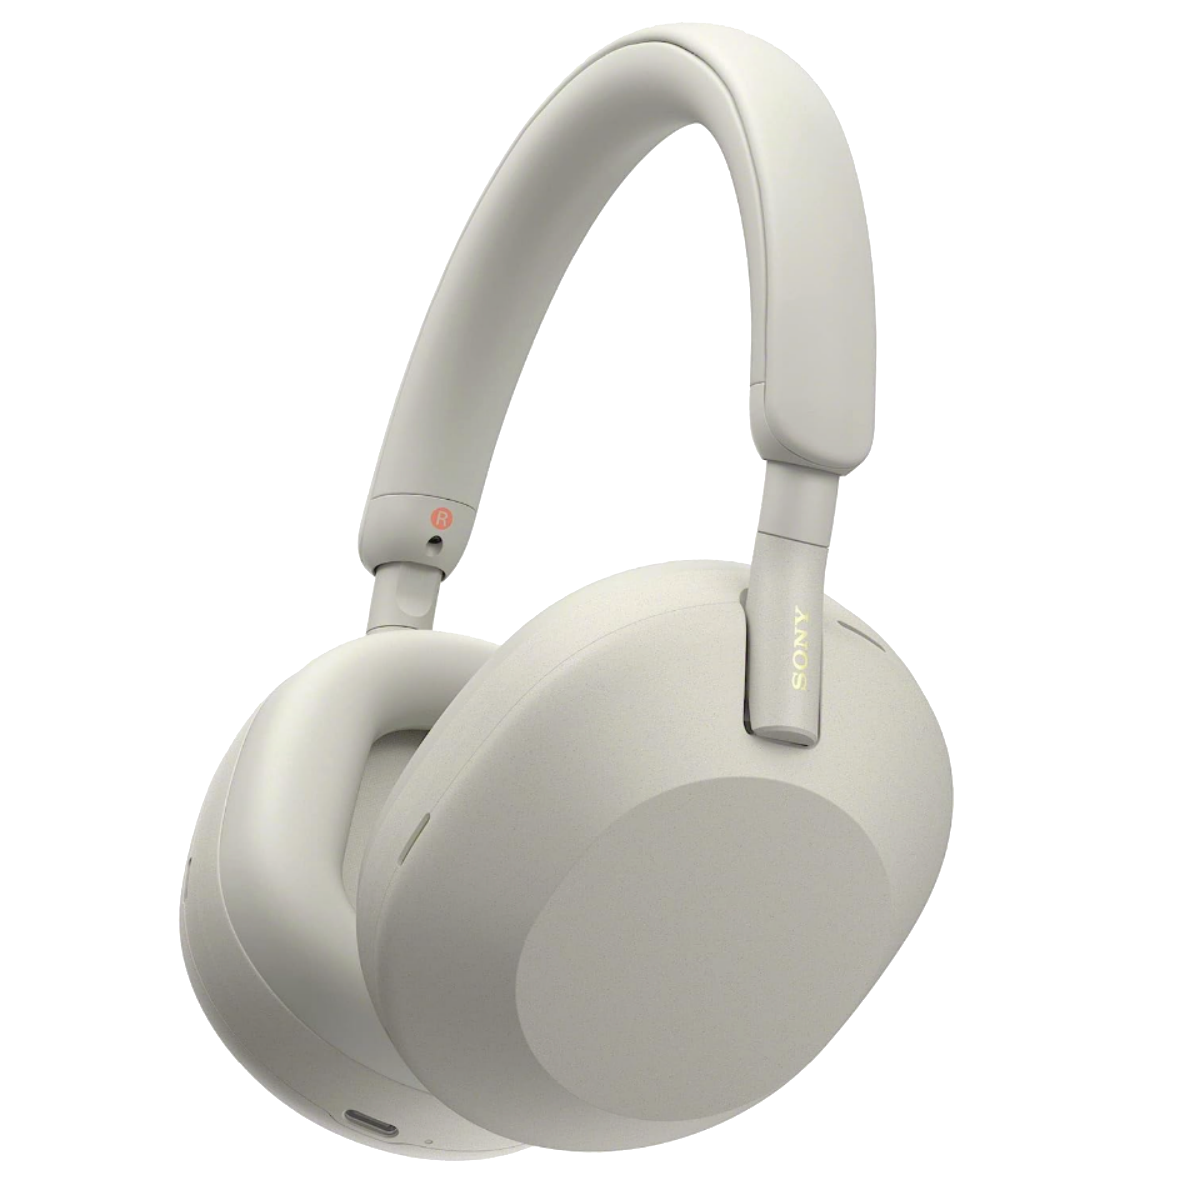 A set of silver Sony WH-1000XM5 headphones.